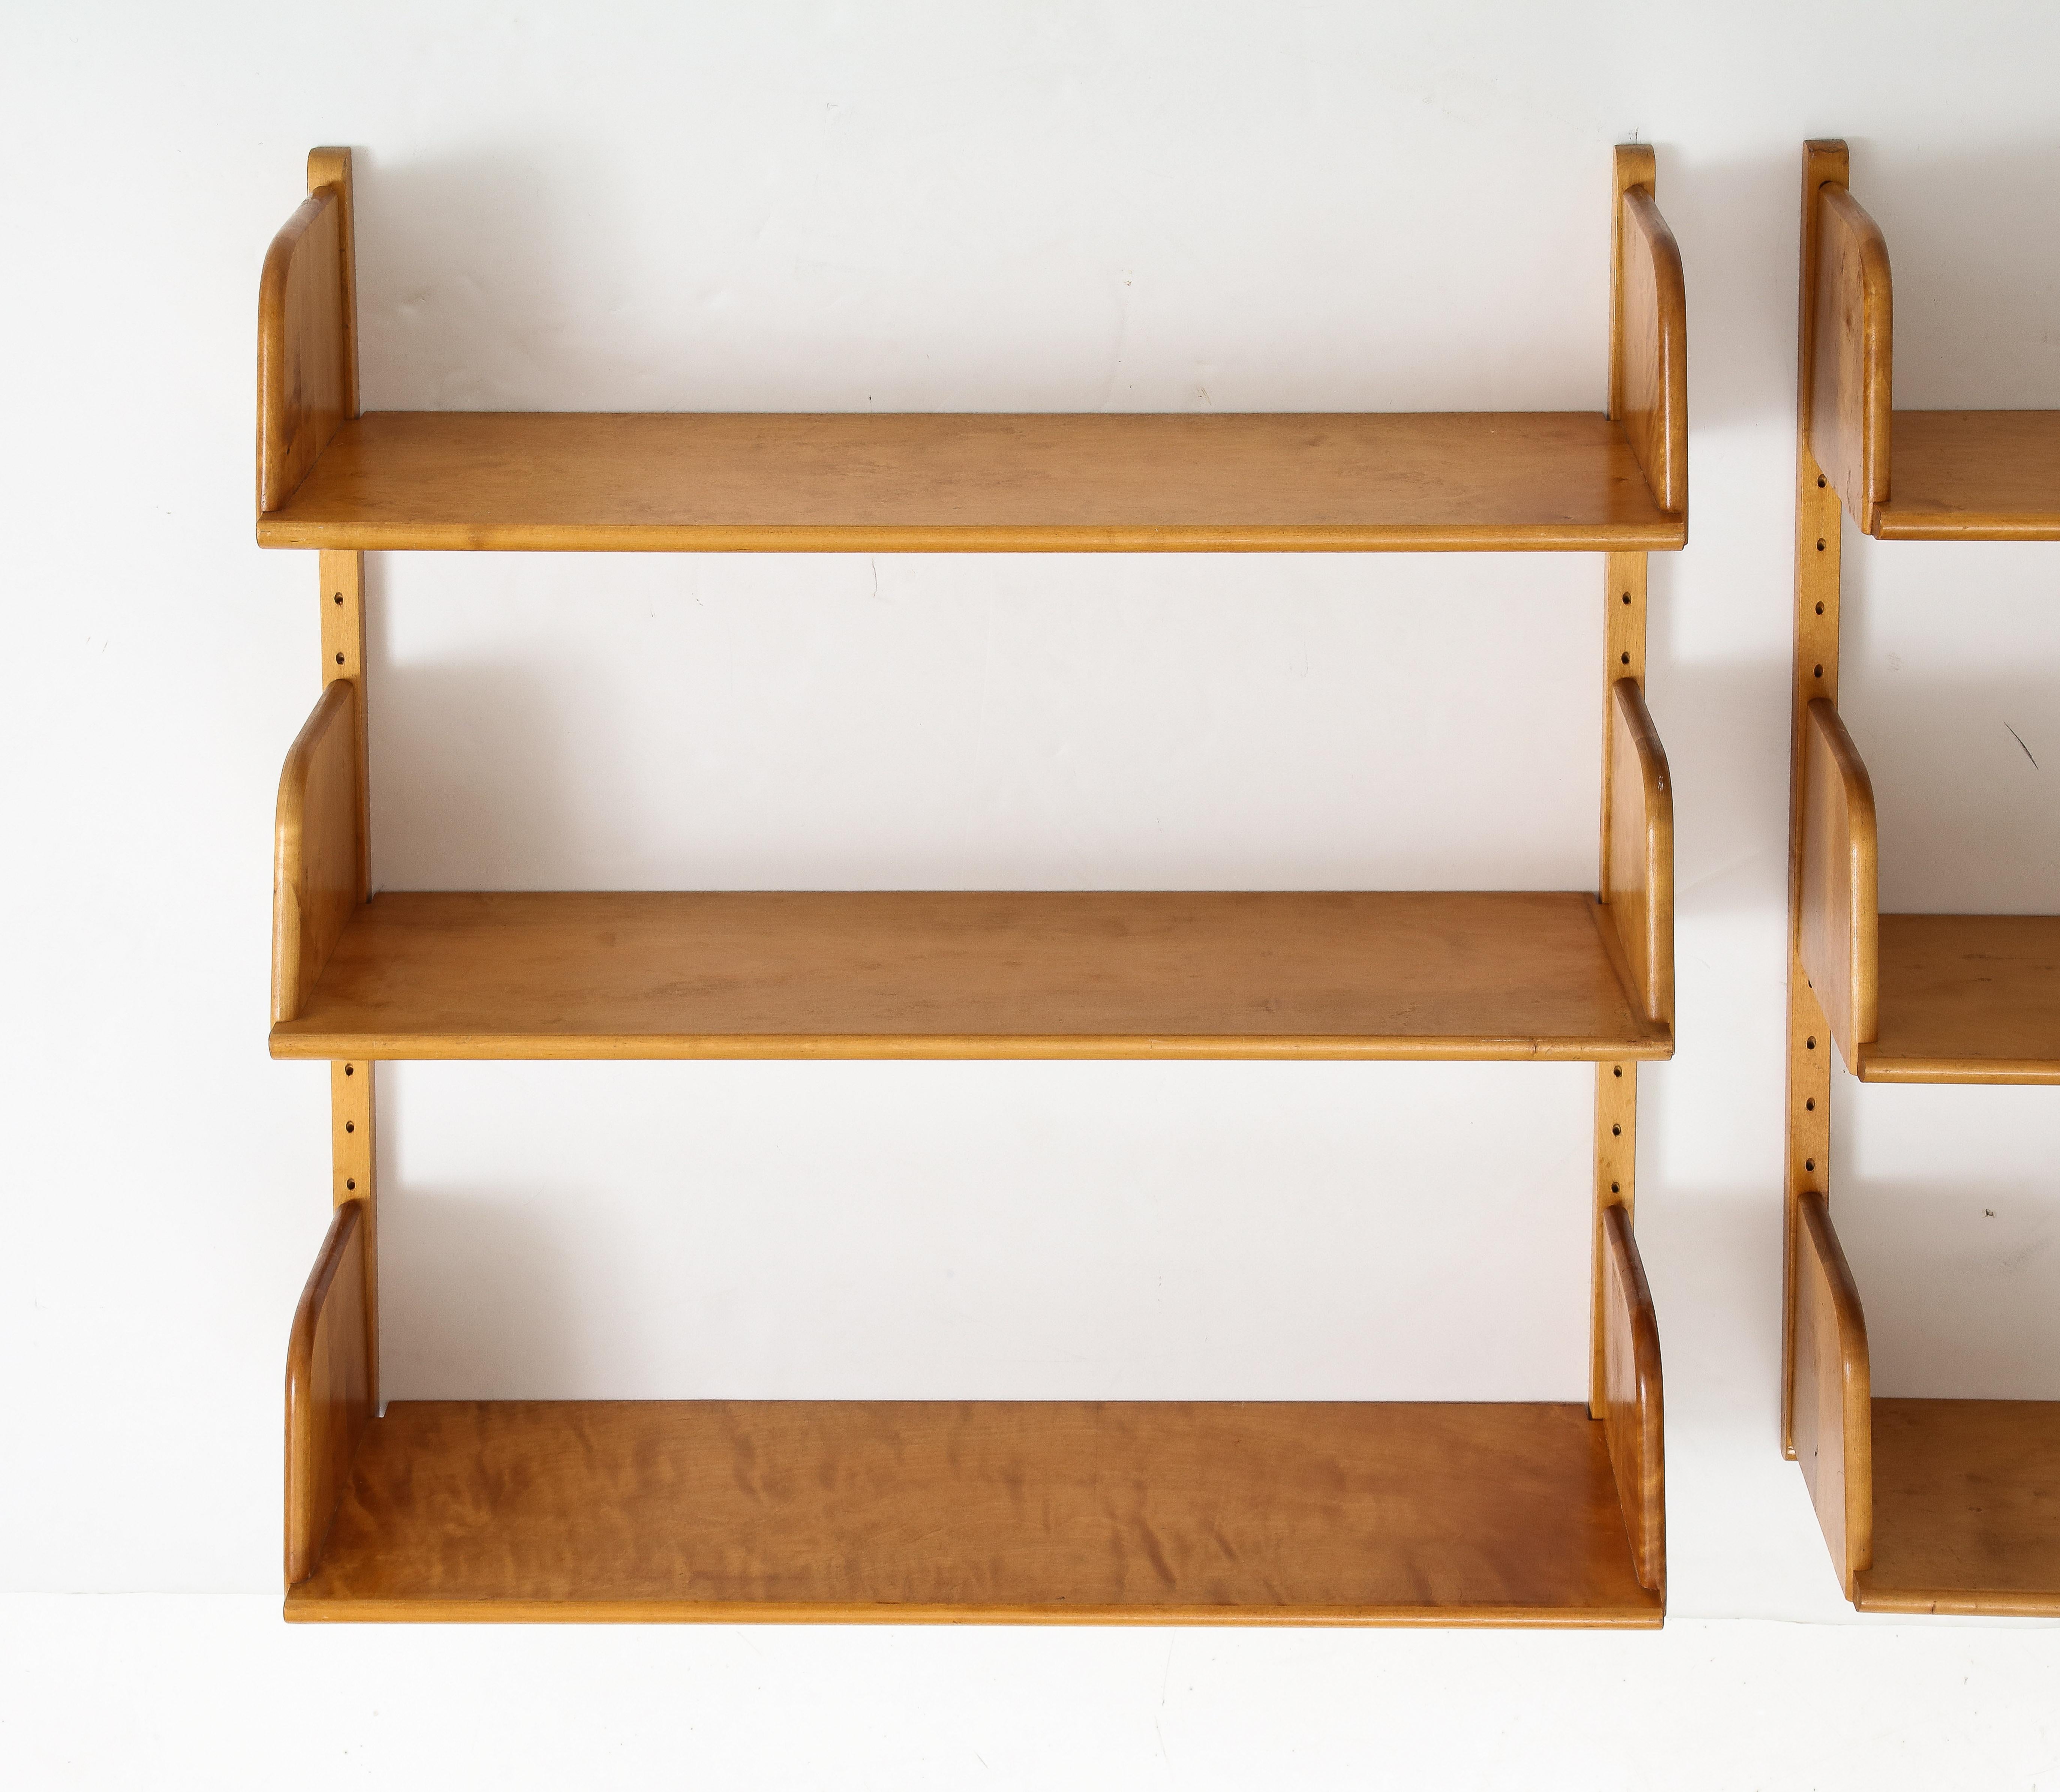 Two Swedish Nordiska Kompaniet birch wood wall shelves, Circa 1940s, Adjustable shelves. Solid Birch shelves, adjustable, mounted to the wall with birch brackets with holes. Stamped. Measurements are for each shelf.